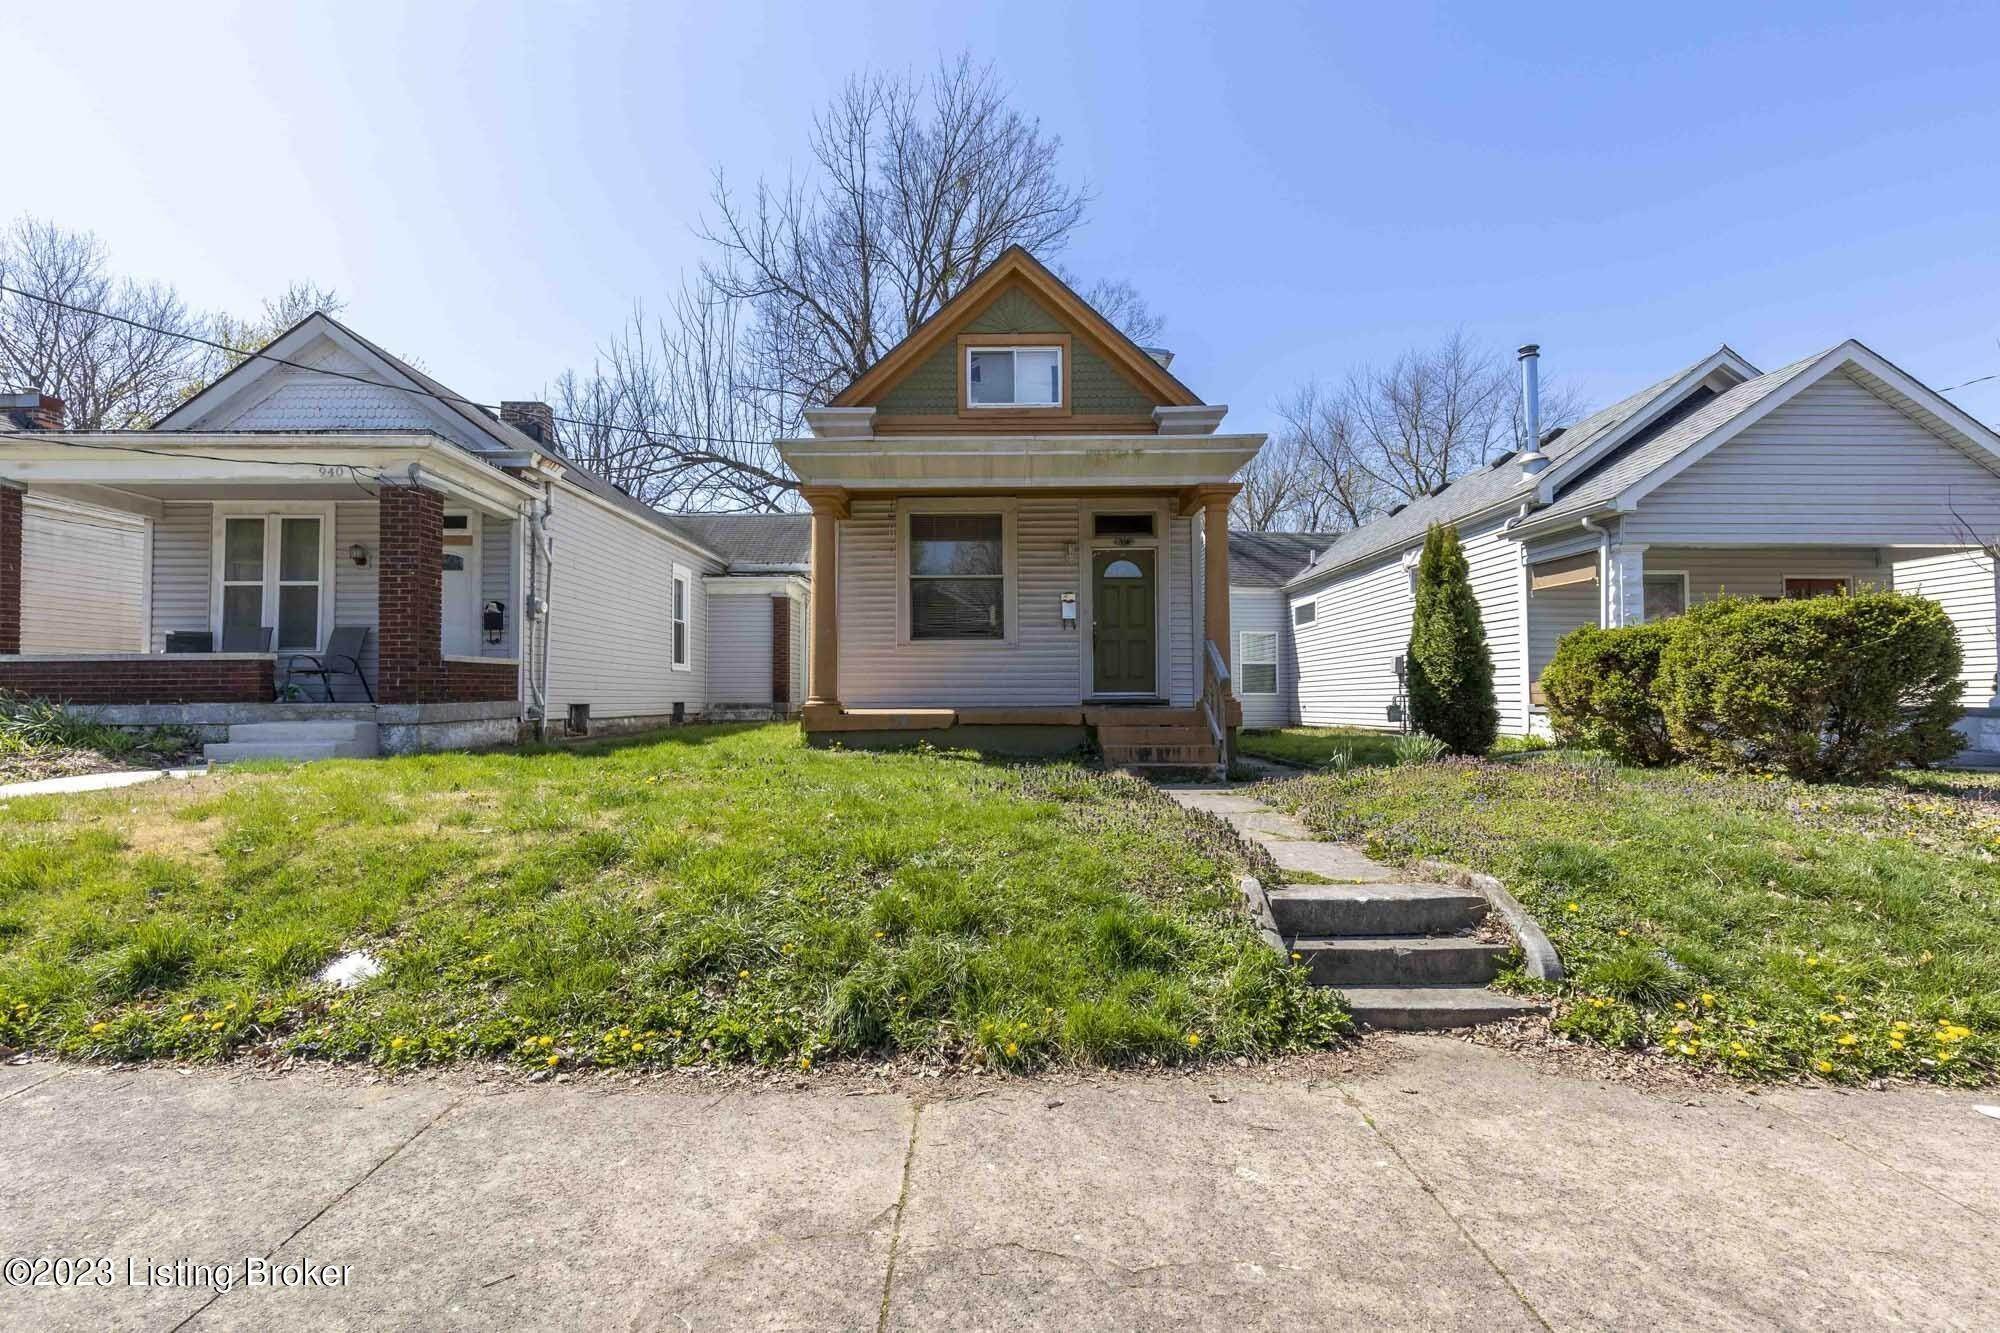 37. Single Family at Louisville, KY 40204